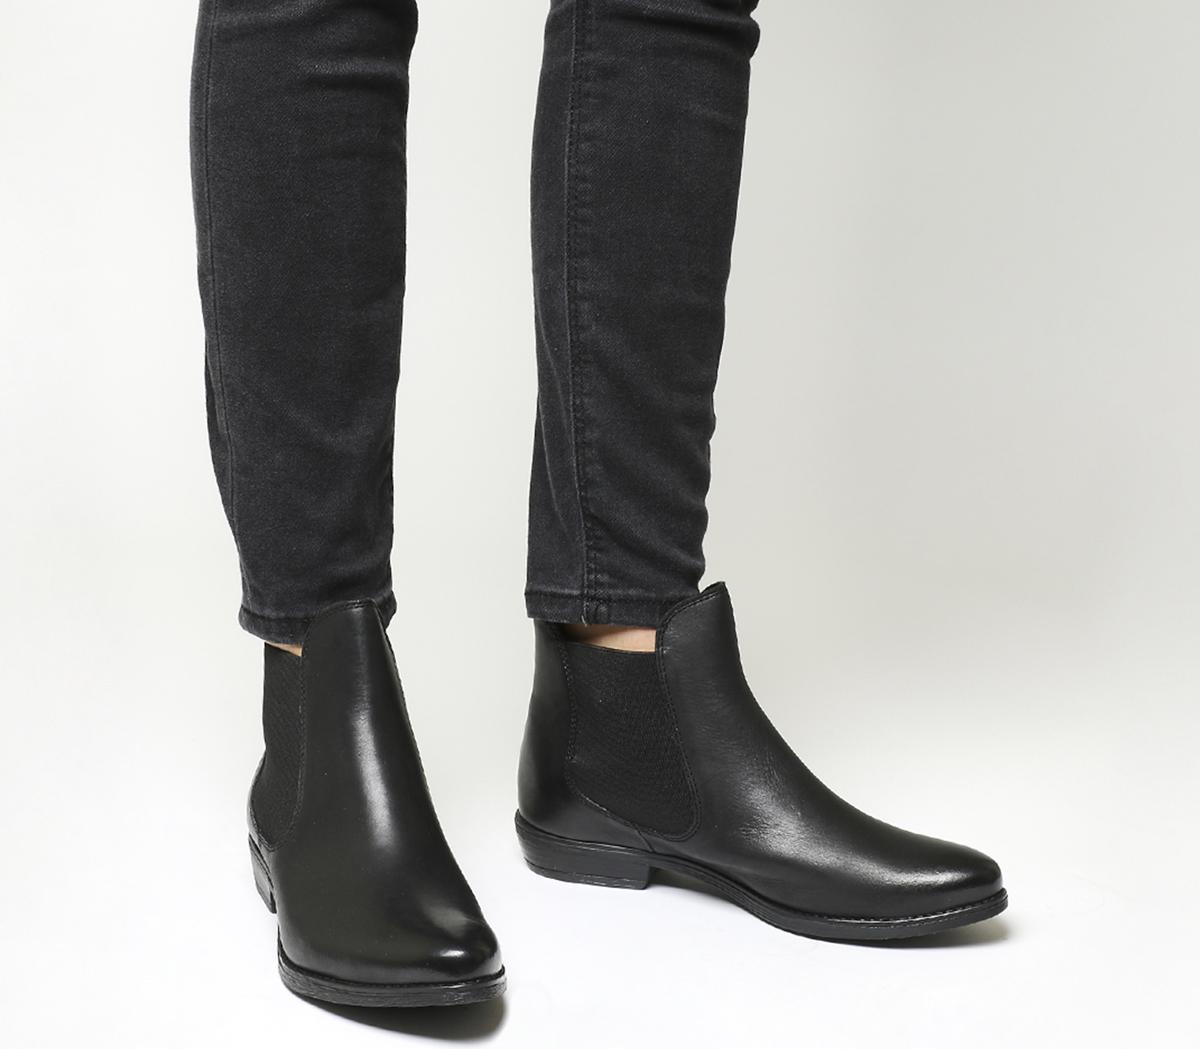 Office Dallas 2 Chelsea Boots Black Leather - Ankle Boots